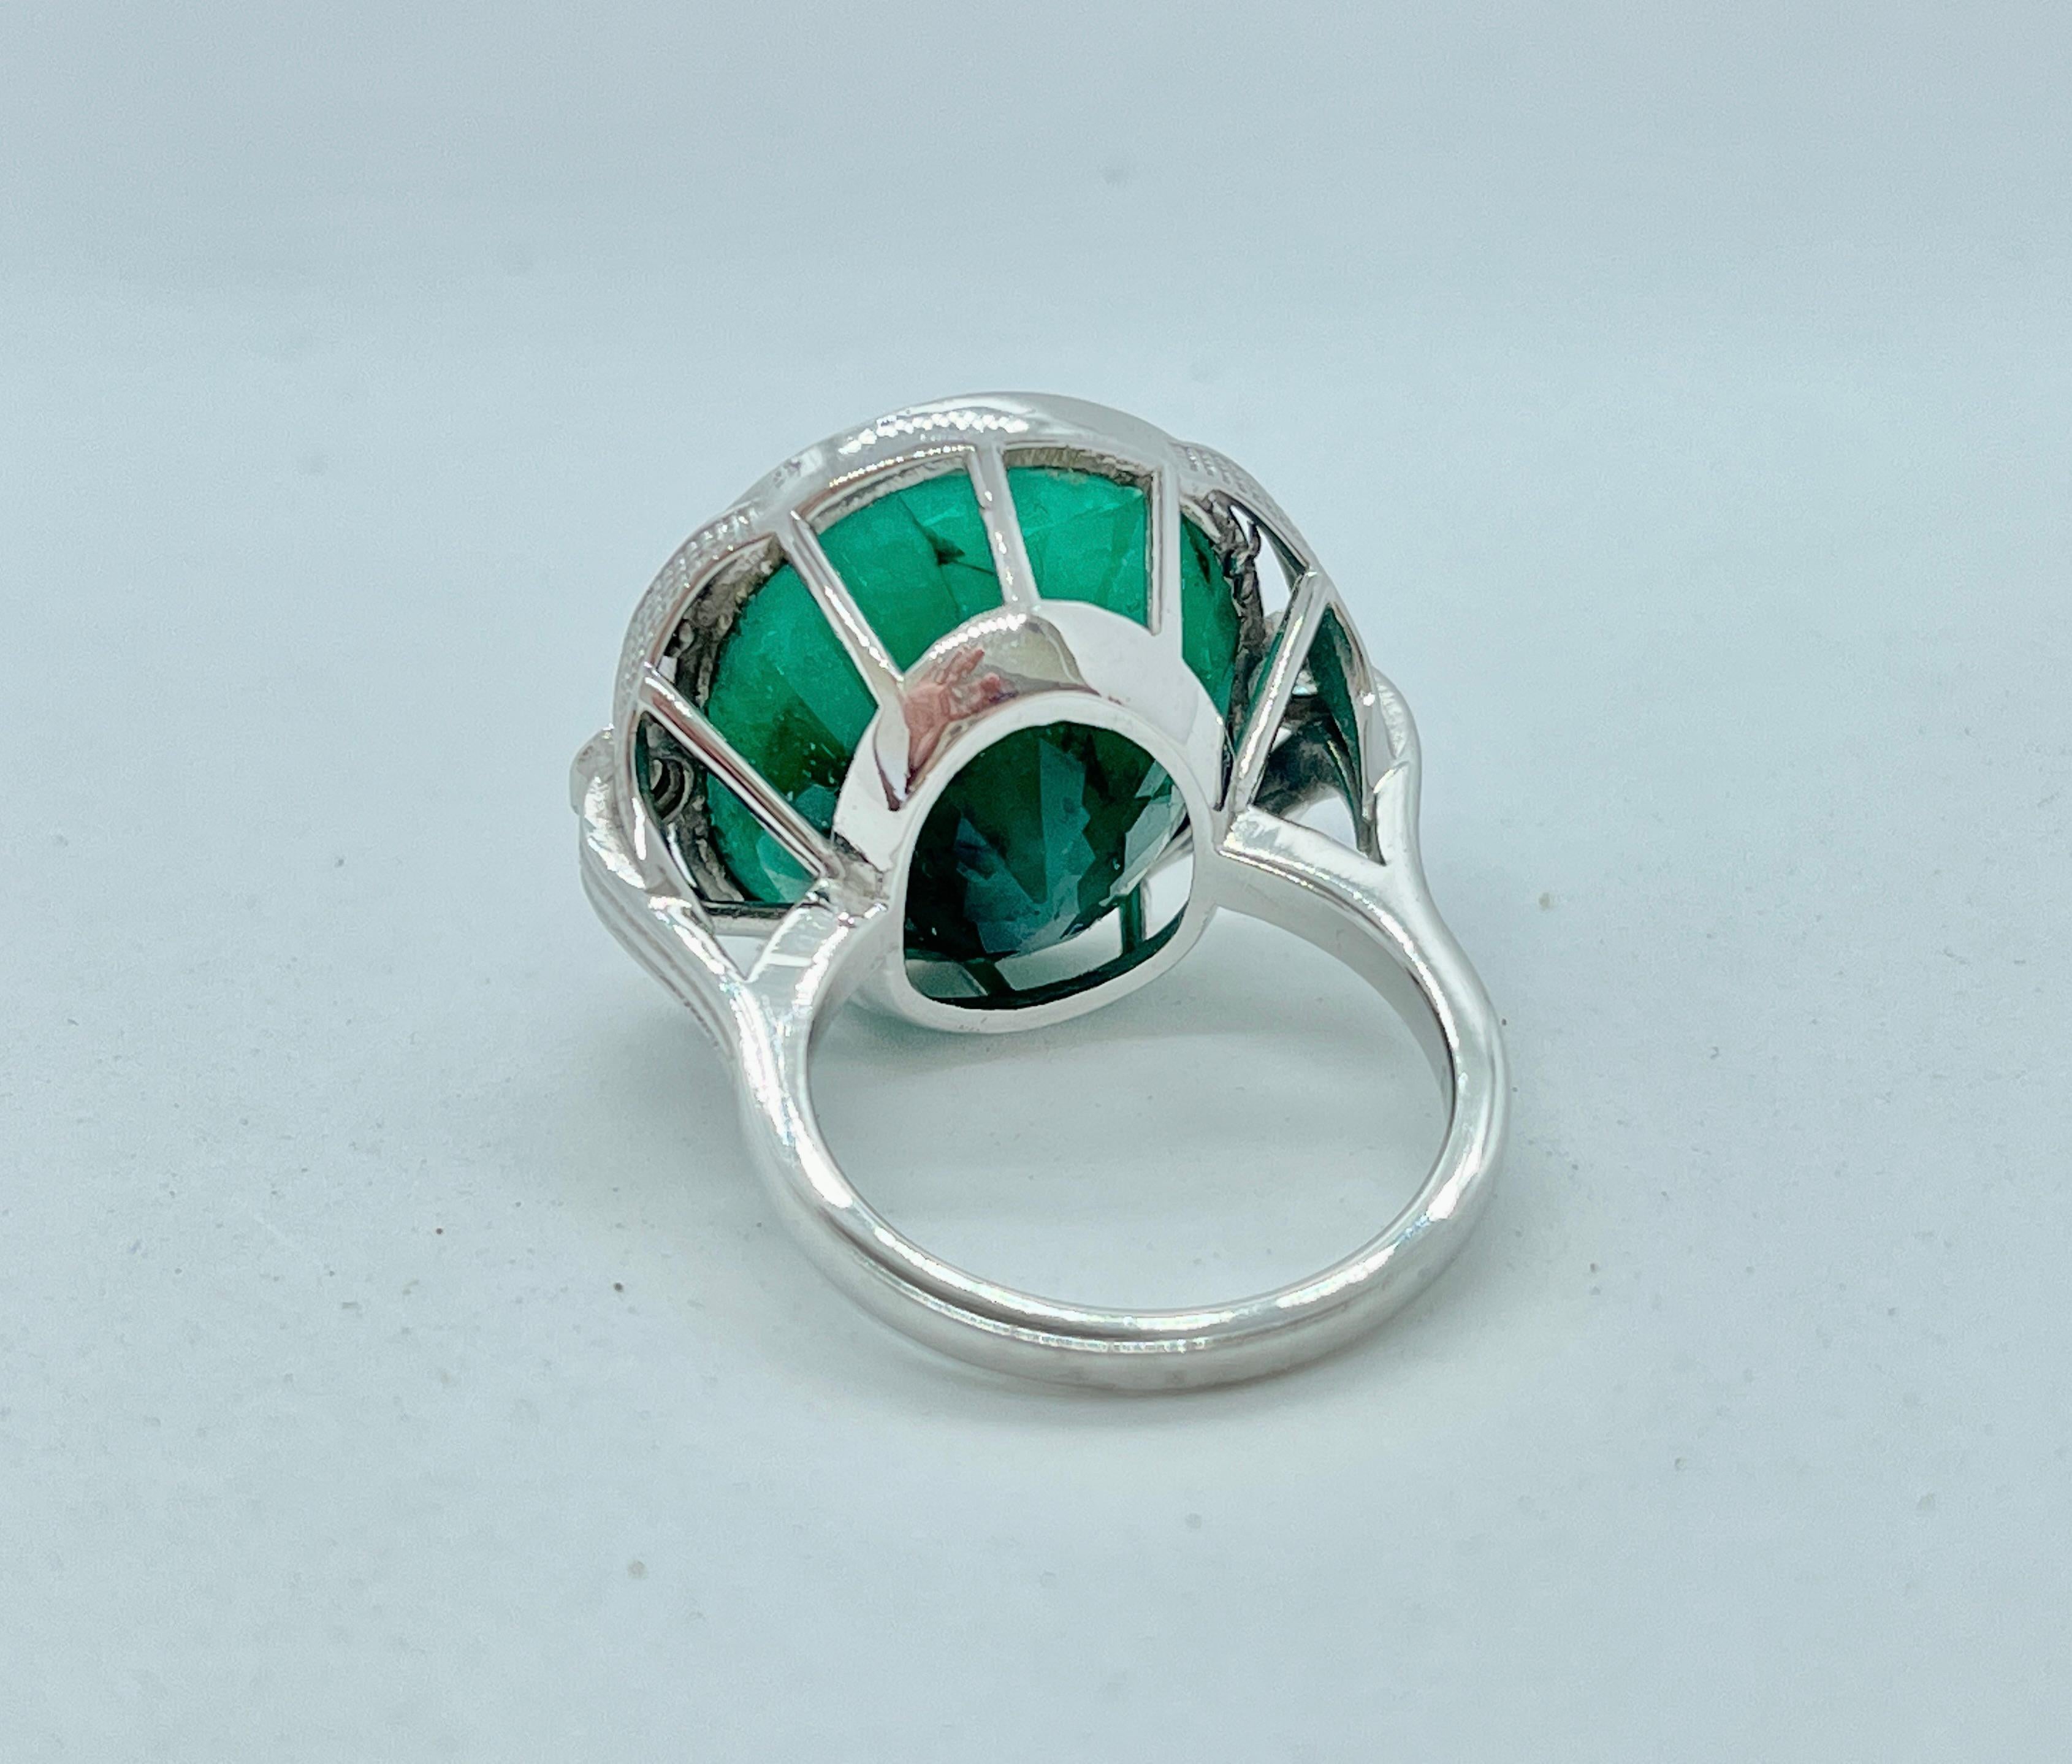 Amazing Huge 20CT Natural Emerald Diamond Ring 9ct White Gold with Valuation For Sale 3